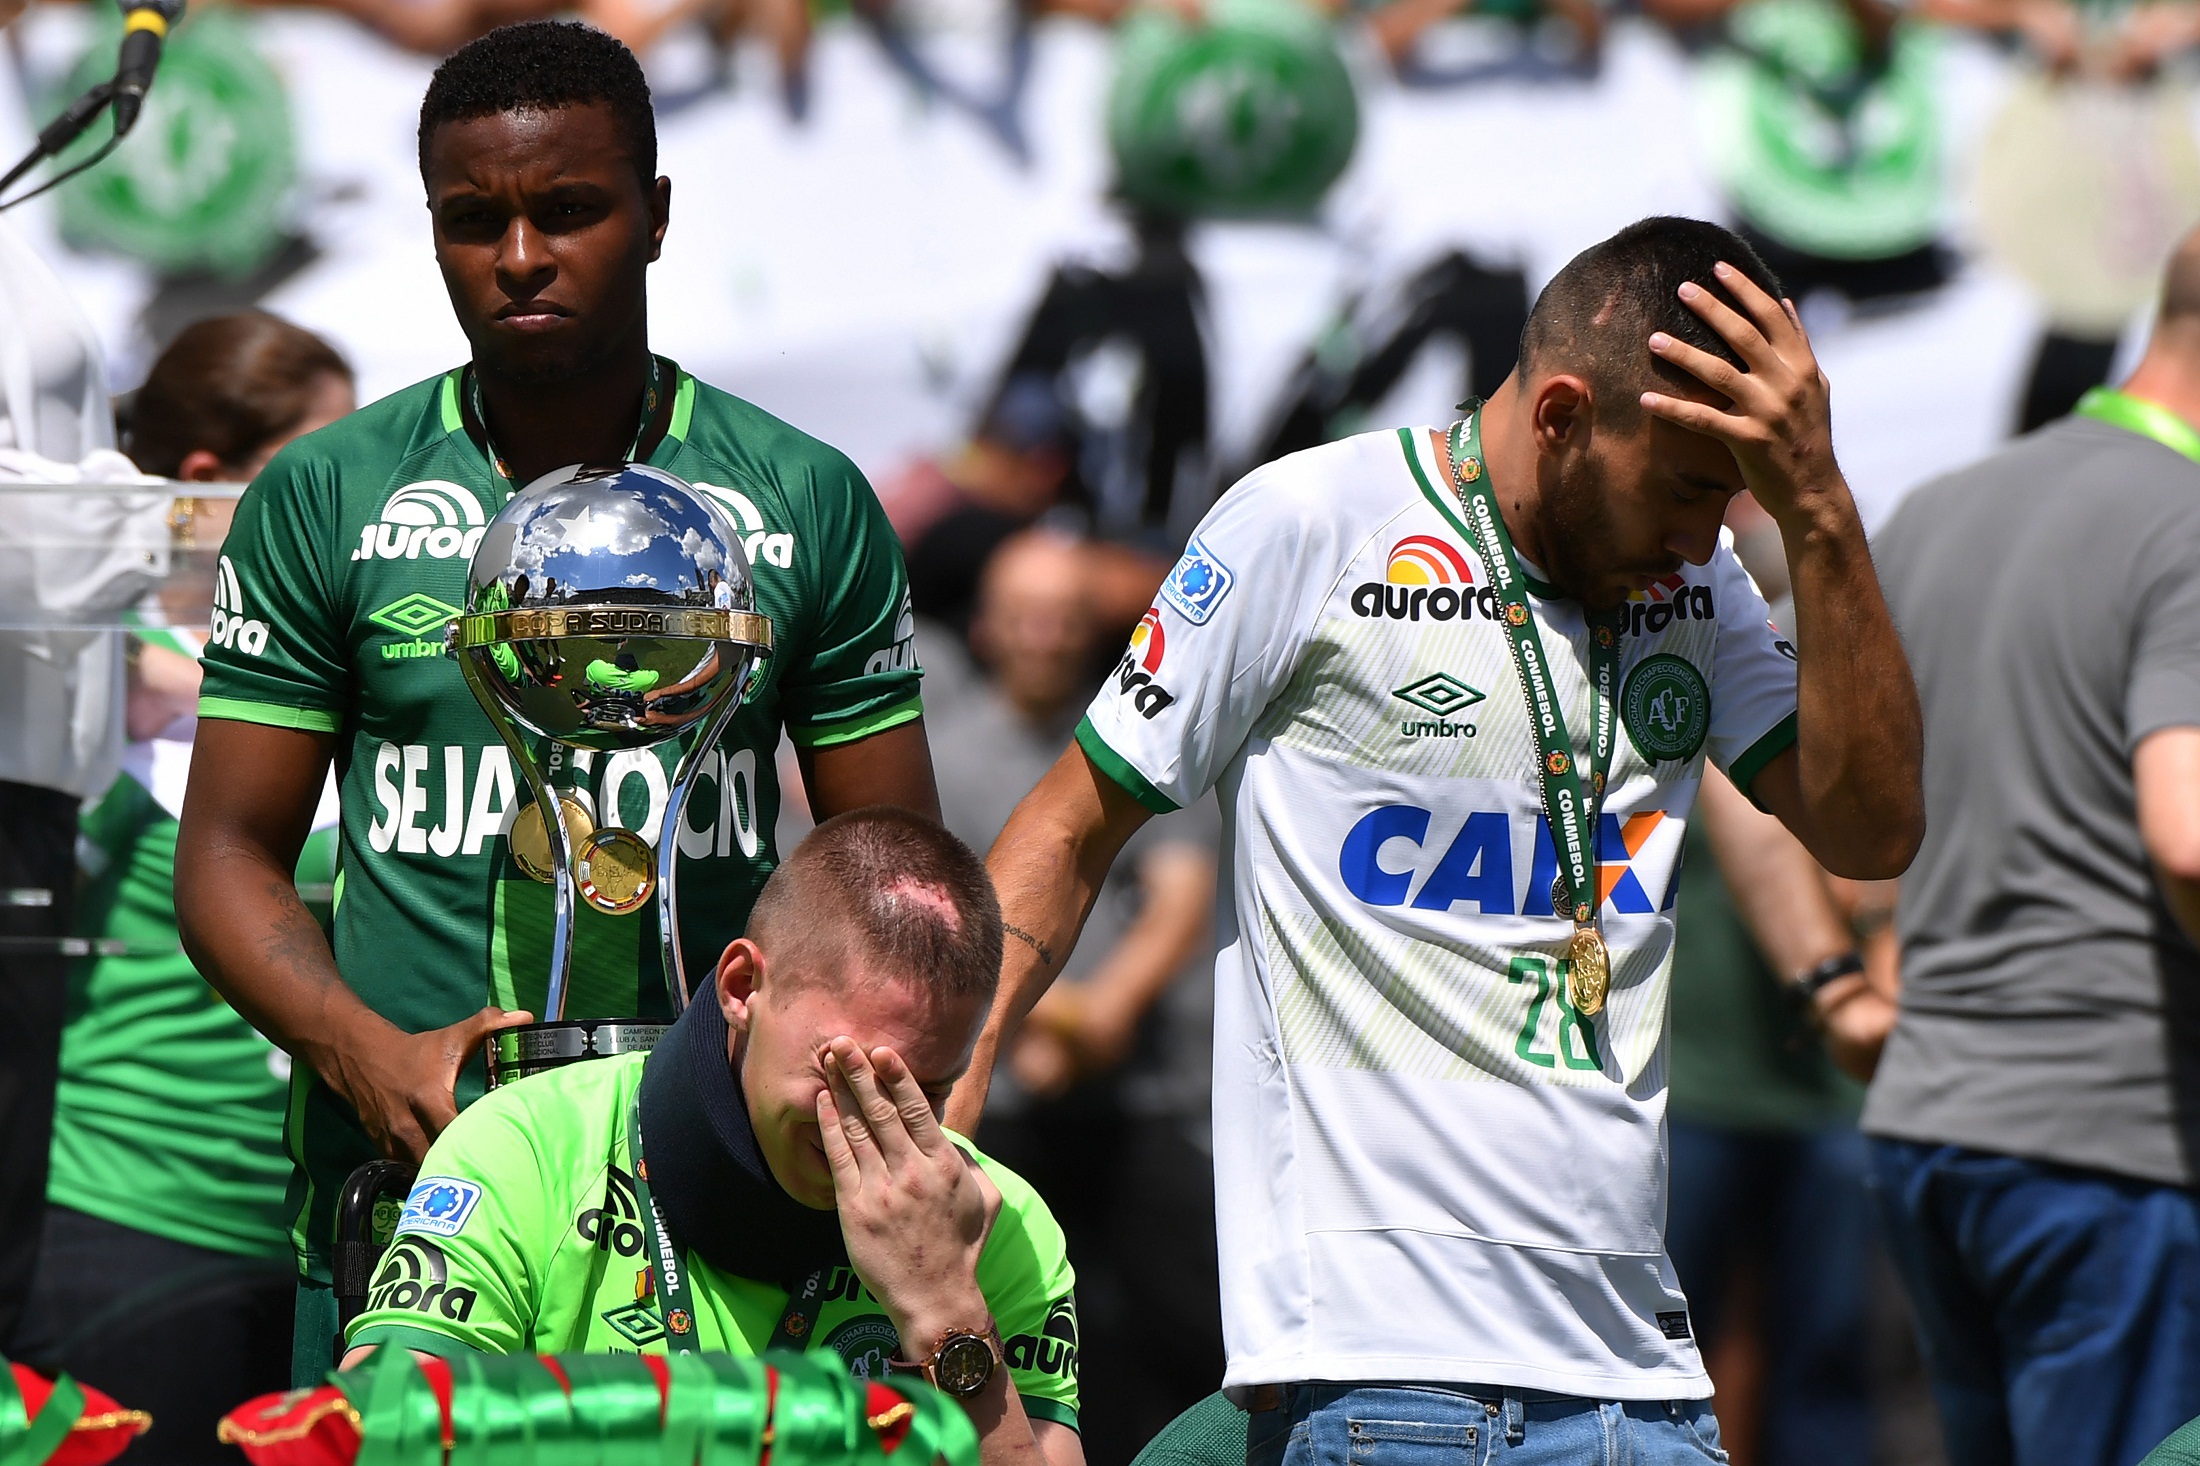 Brazilian Chapecoense footballers Alan Ruschel (R) and Jackson Follmann (C), survivors of the LaMia airplane crash in Colombia, receive the Copa Sudamericana trophy at the Arena Conda stadium in Chapeco, Santa Catarina state, in southern Brazil on January 21, 2017, before a friendly match against Palmeiras - Brazilian Champion 2016.  Most of the members of the Chapocoense football team perished in a November 28, 2016 plane crash in Colombia. / AFP PHOTO / NELSON ALMEIDA